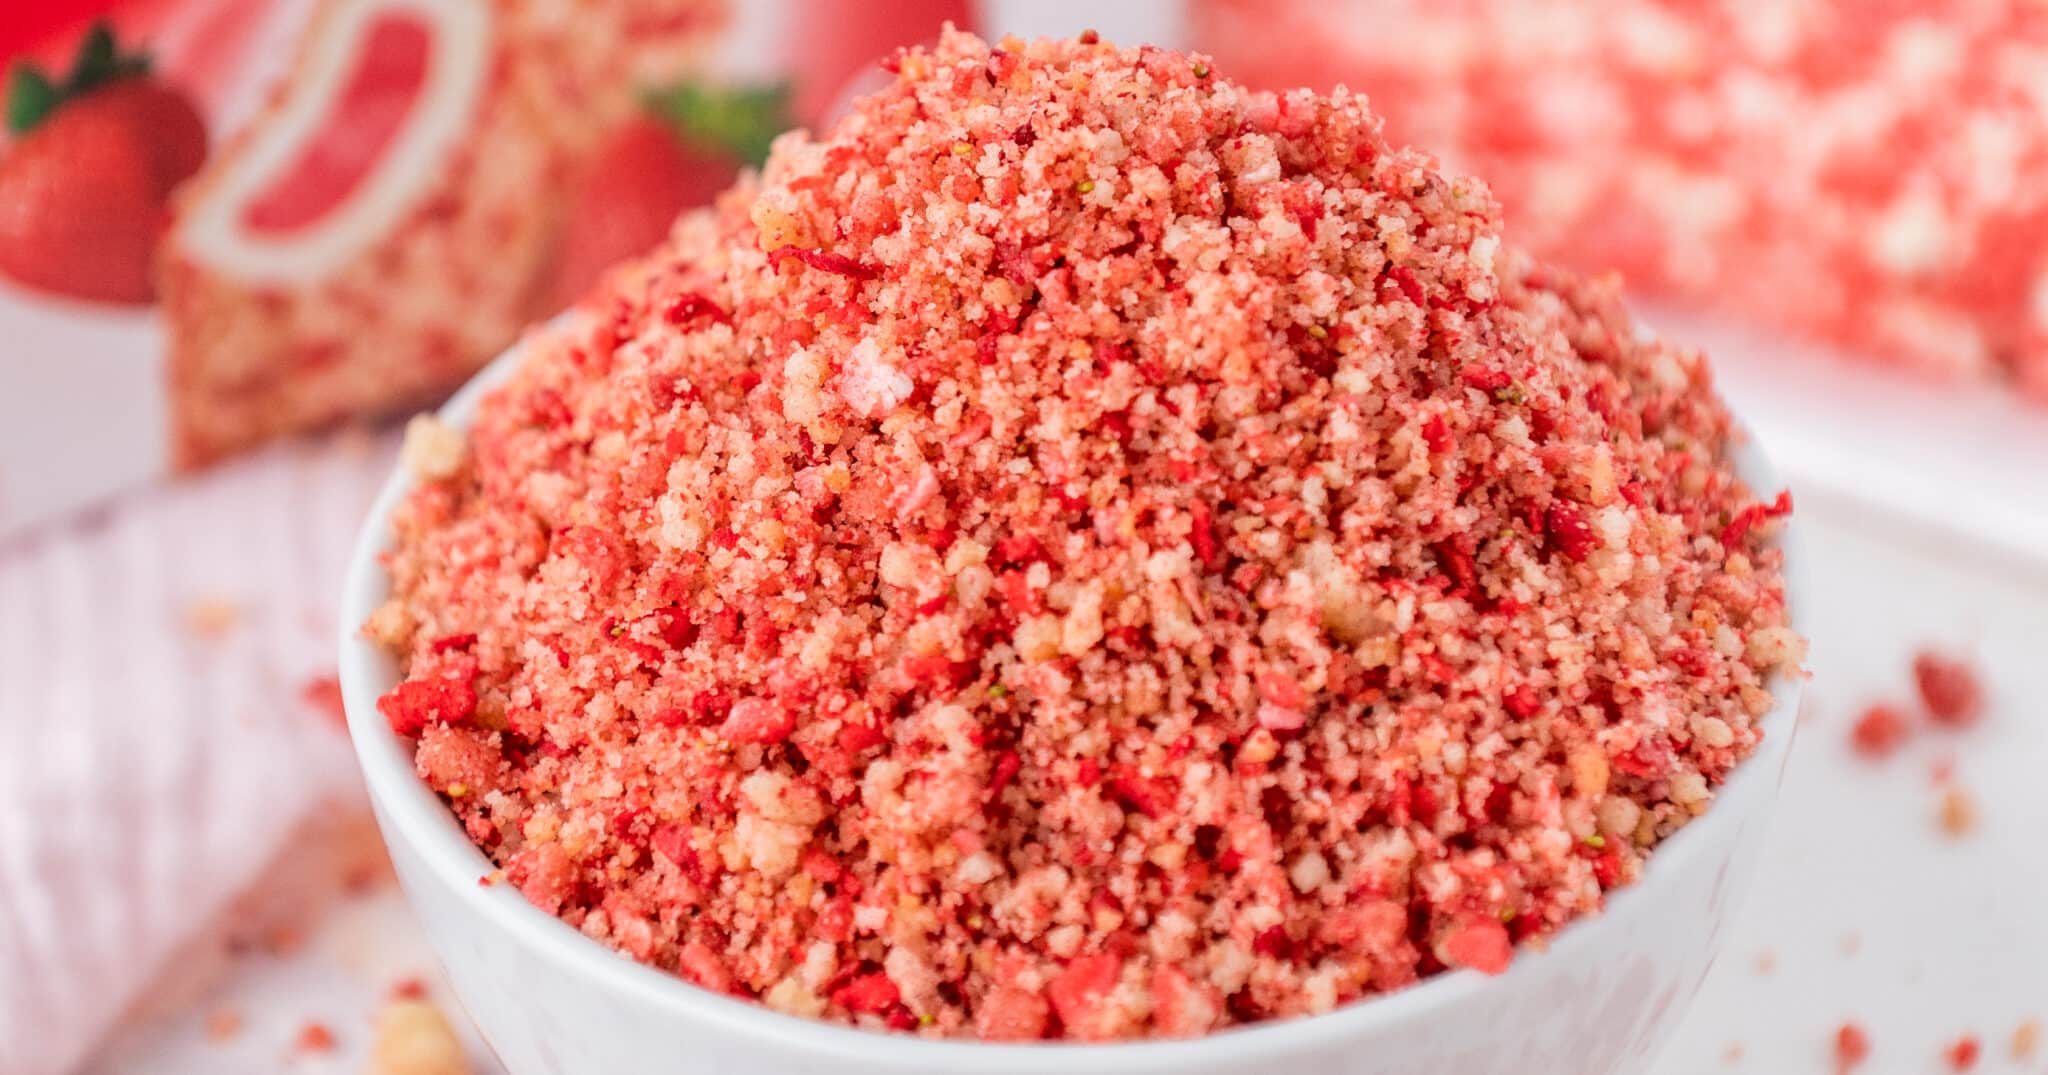 Strawberry flavored Cornstarch Chunks, Pebbles, Crumbs – Satisfying Crunchy